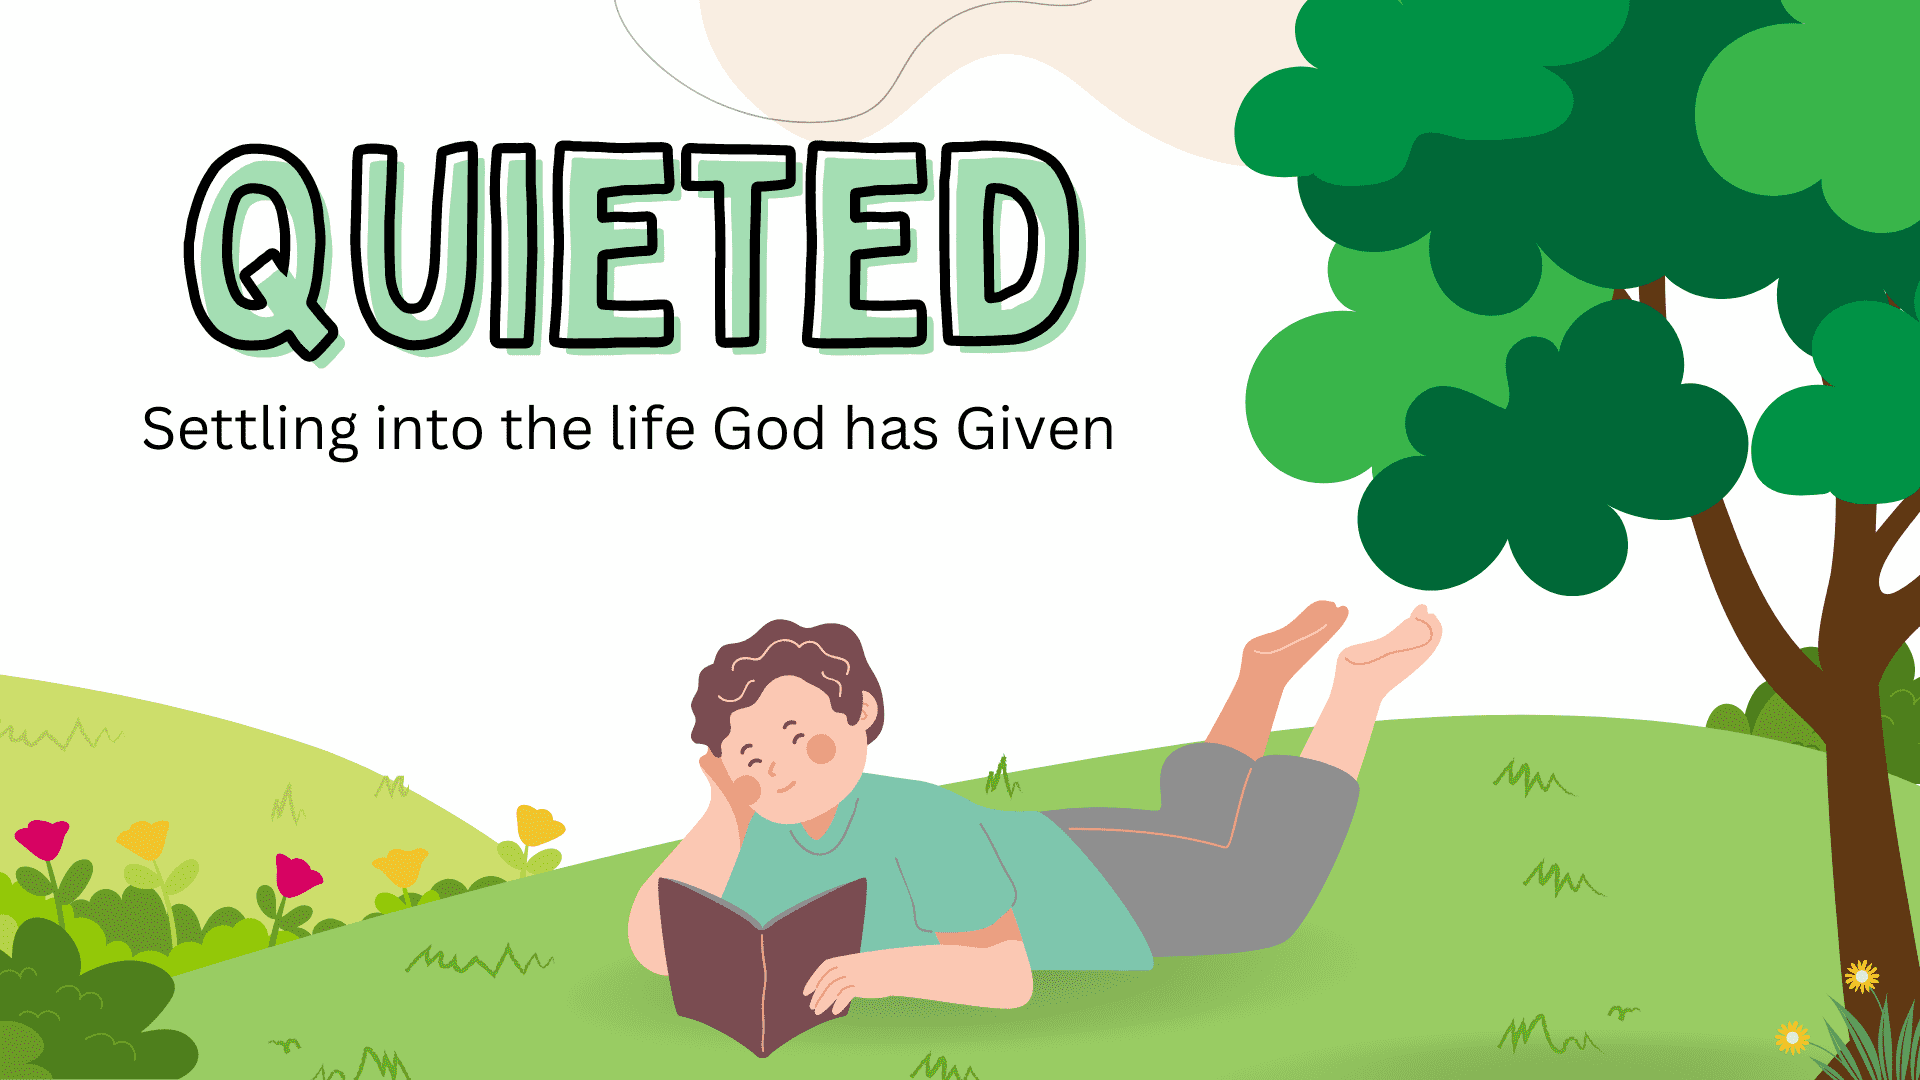 Quieted: Enough God for The Day